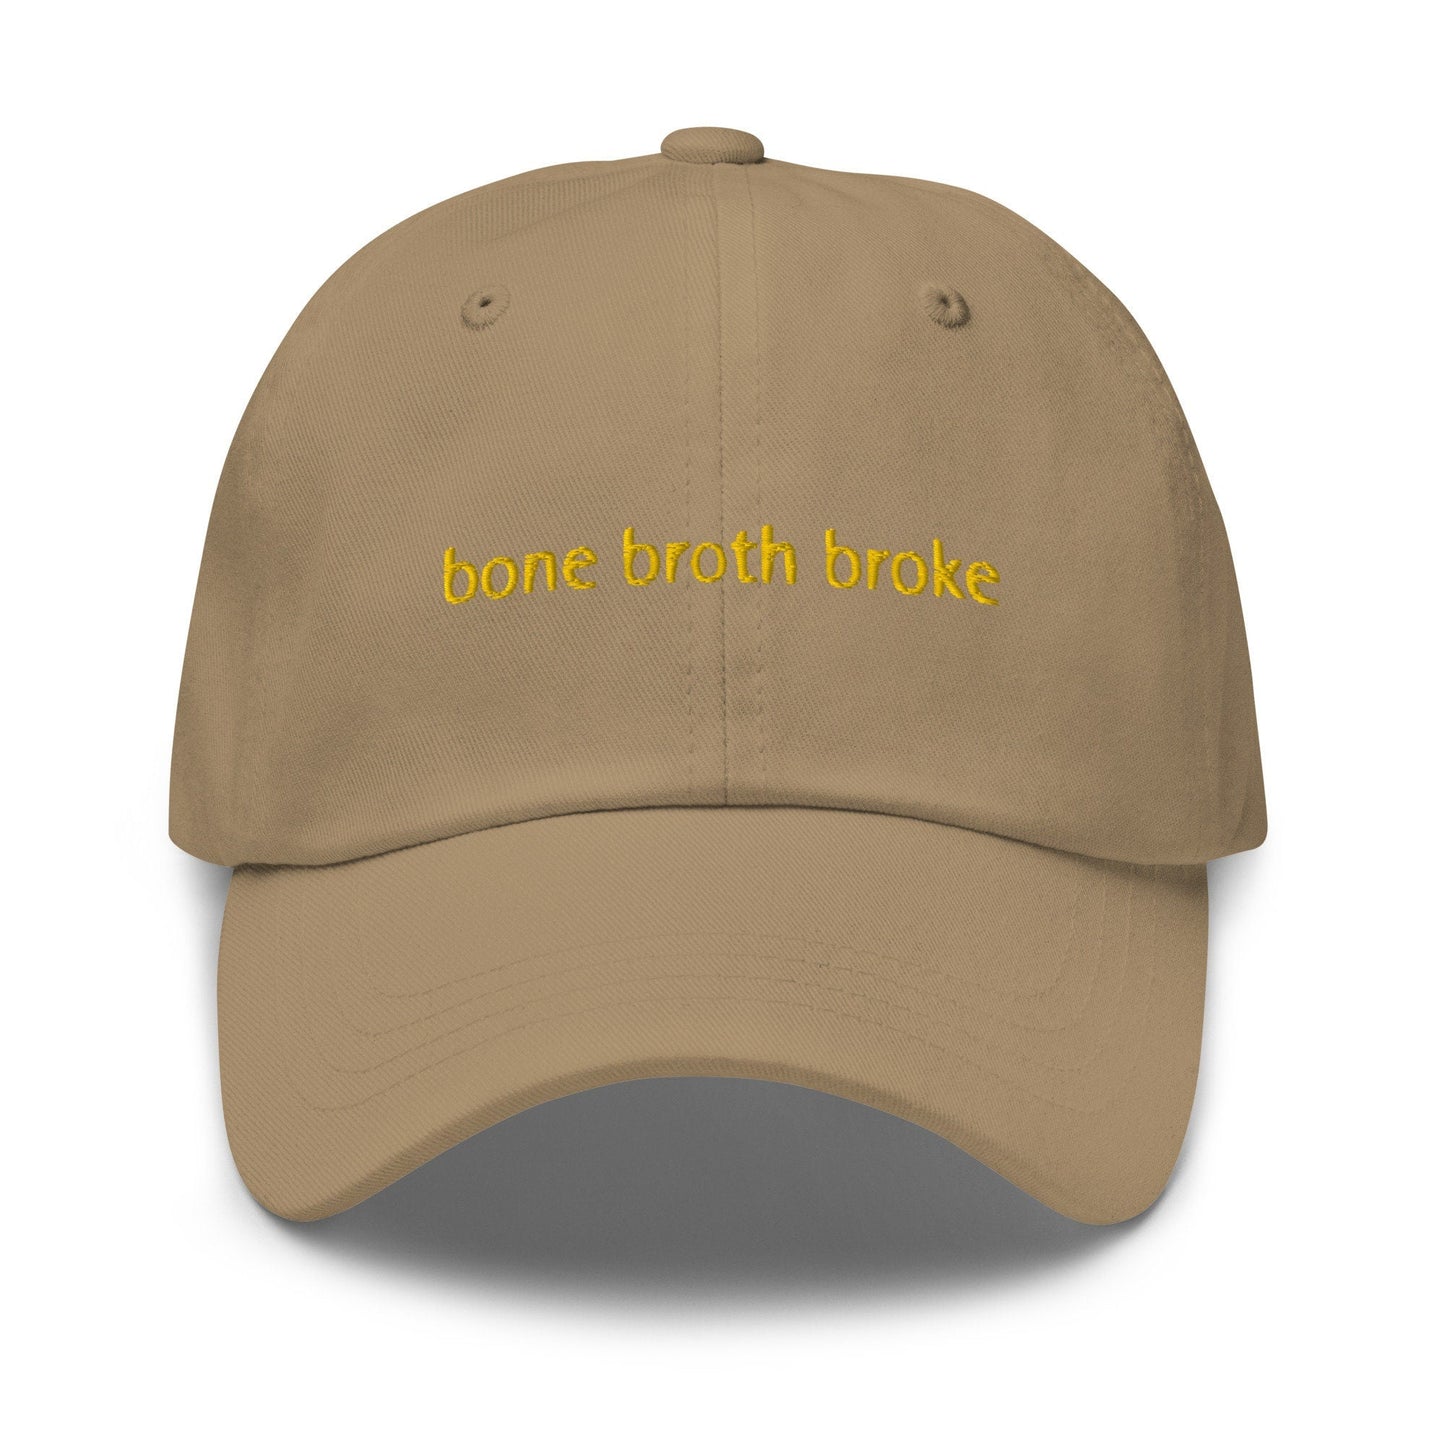 Bone Broth Dad hat - Funny Gift for Goop Fans, Soup fans and Health Goths - Cotton Embroidered Cap - Evilwater Originals